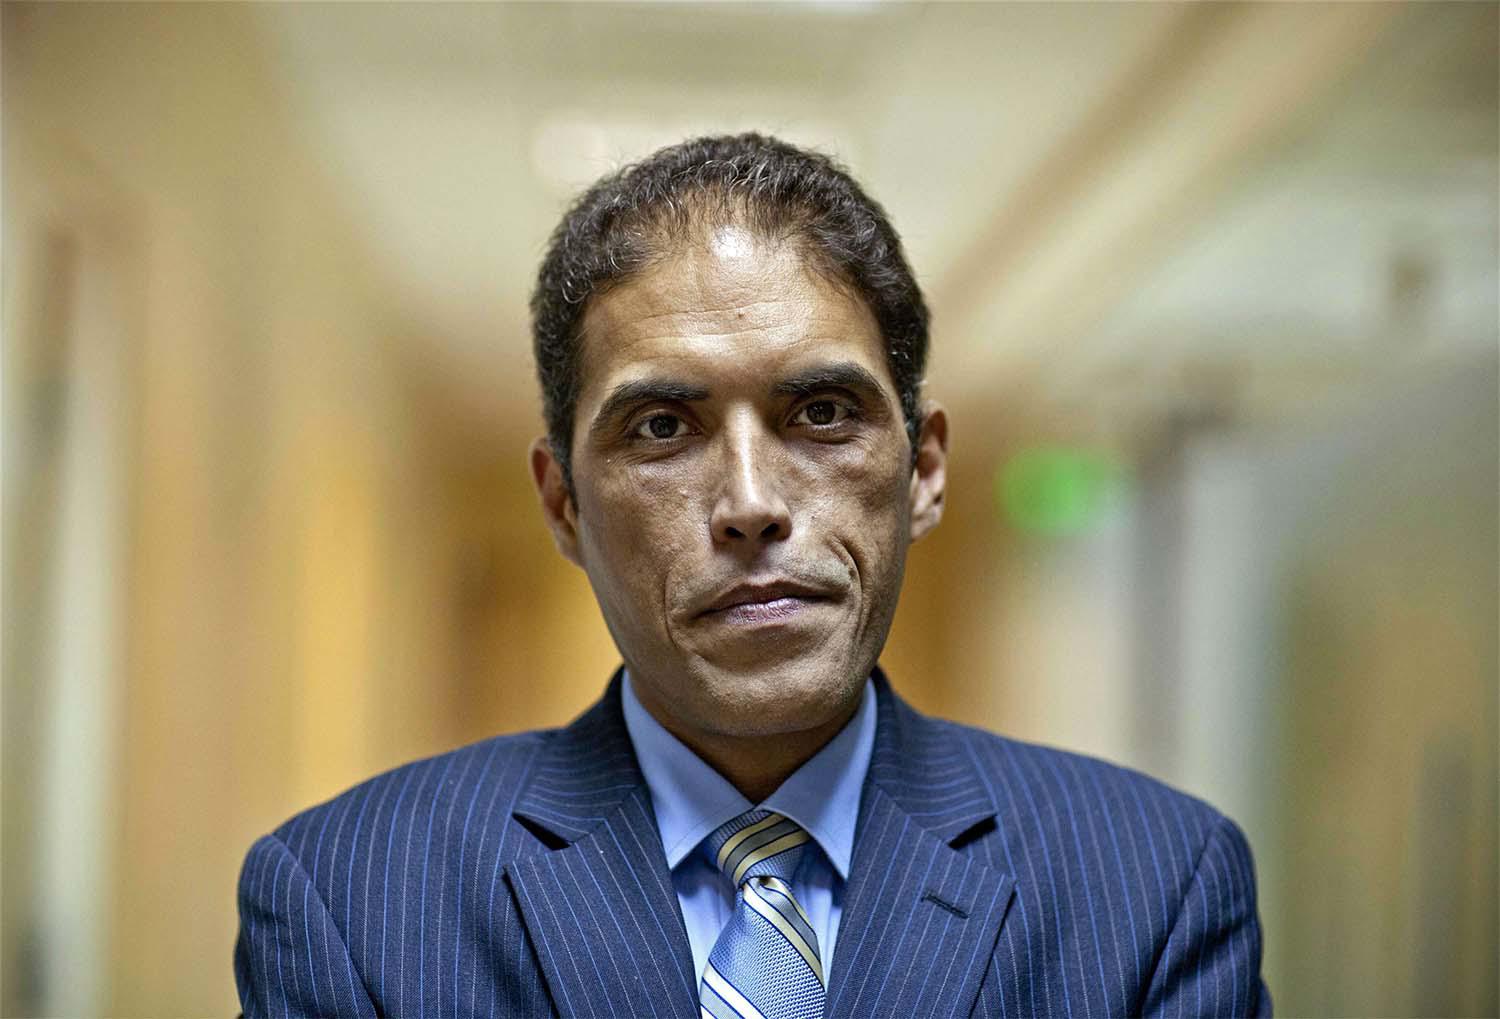 Dawoud was arrested in September 2019 following small but rare anti-government protests